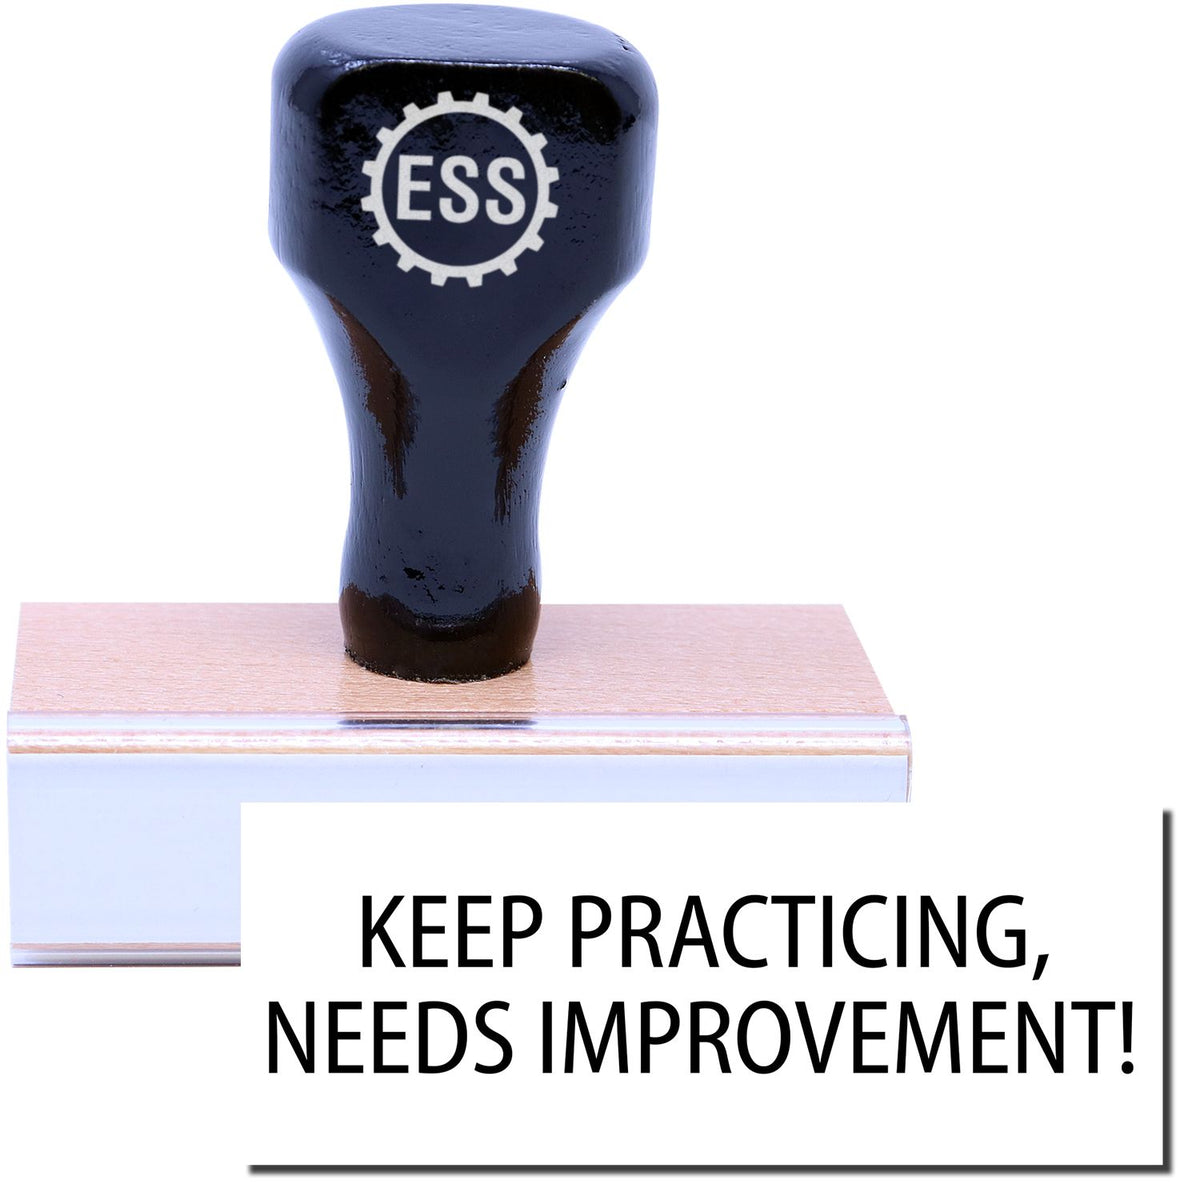 A stock office rubber stamp with a stamped image showing how the text &quot;KEEP PRACTICING, NEEDS IMPROVEMENT!&quot; in a large font is displayed after stamping.